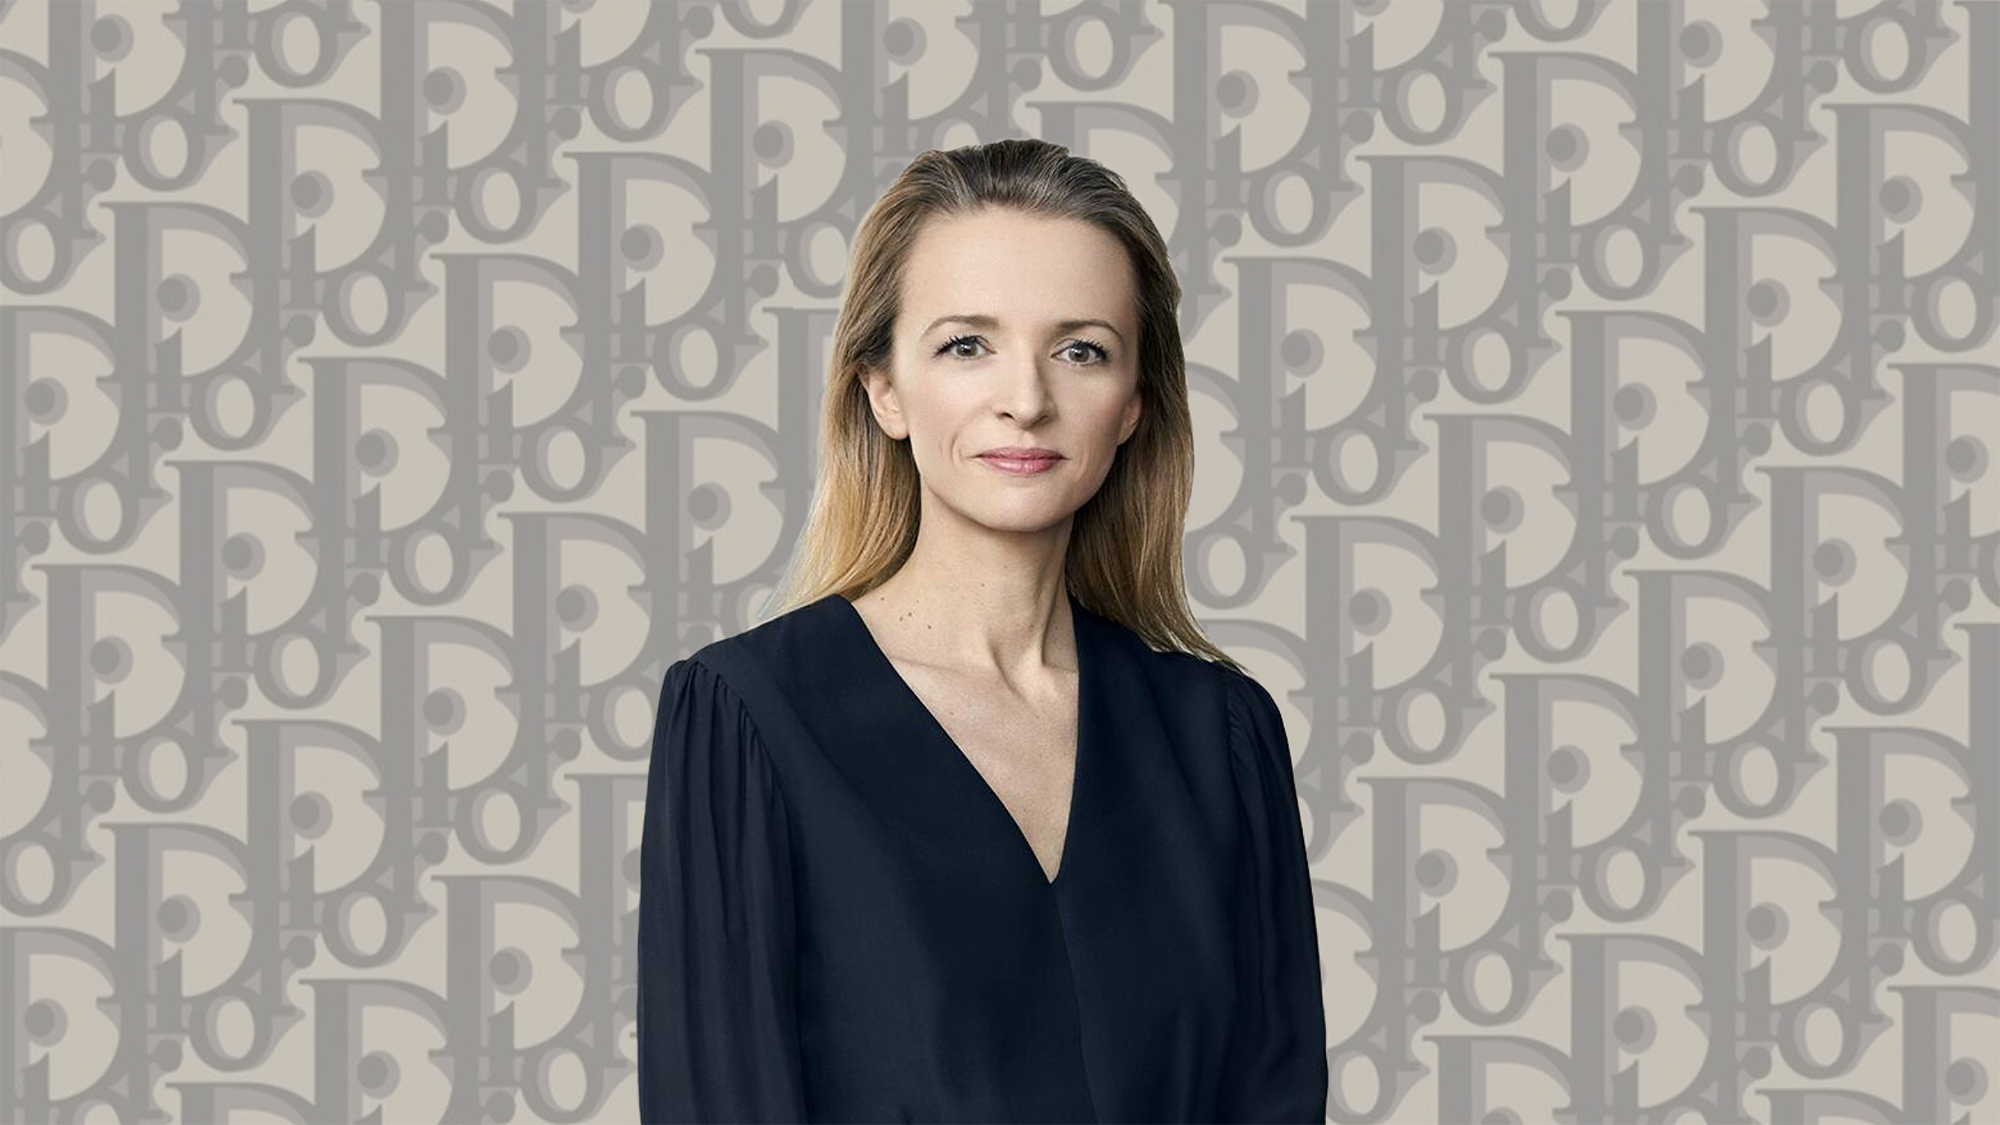 Delphine Arnault: At the Forefront of LVMH's Future and CEO of Dior